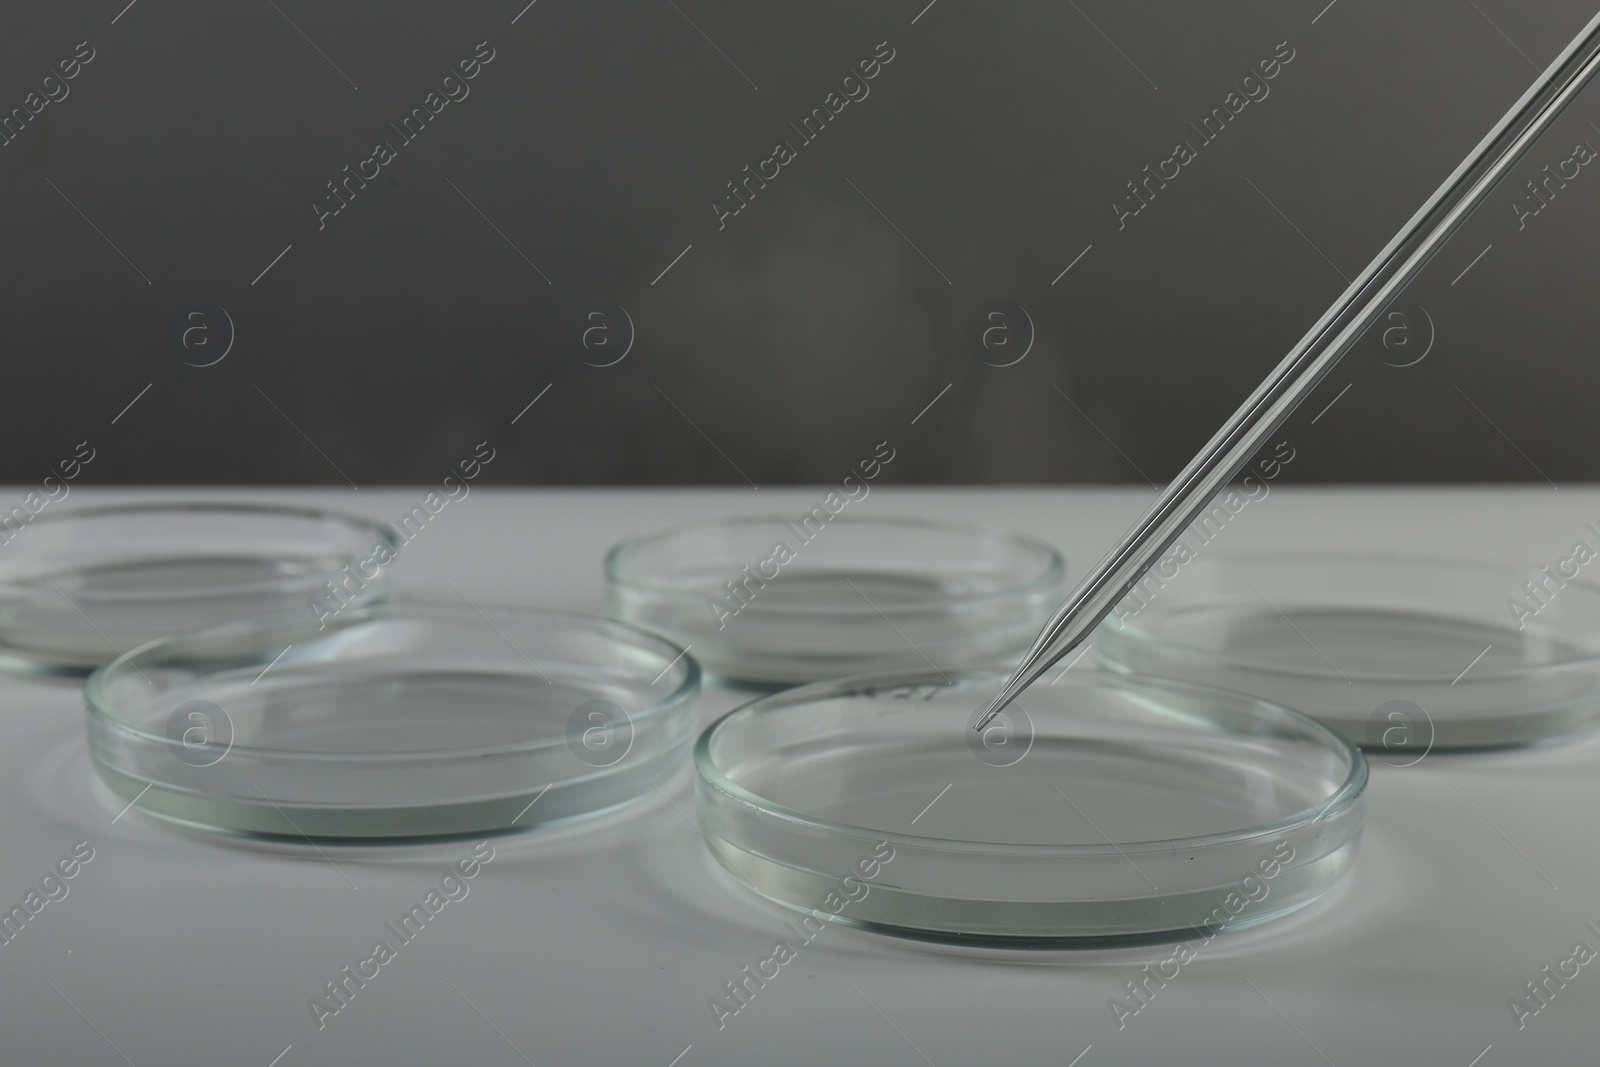 Photo of Pipette over petri dish on light table against grey background